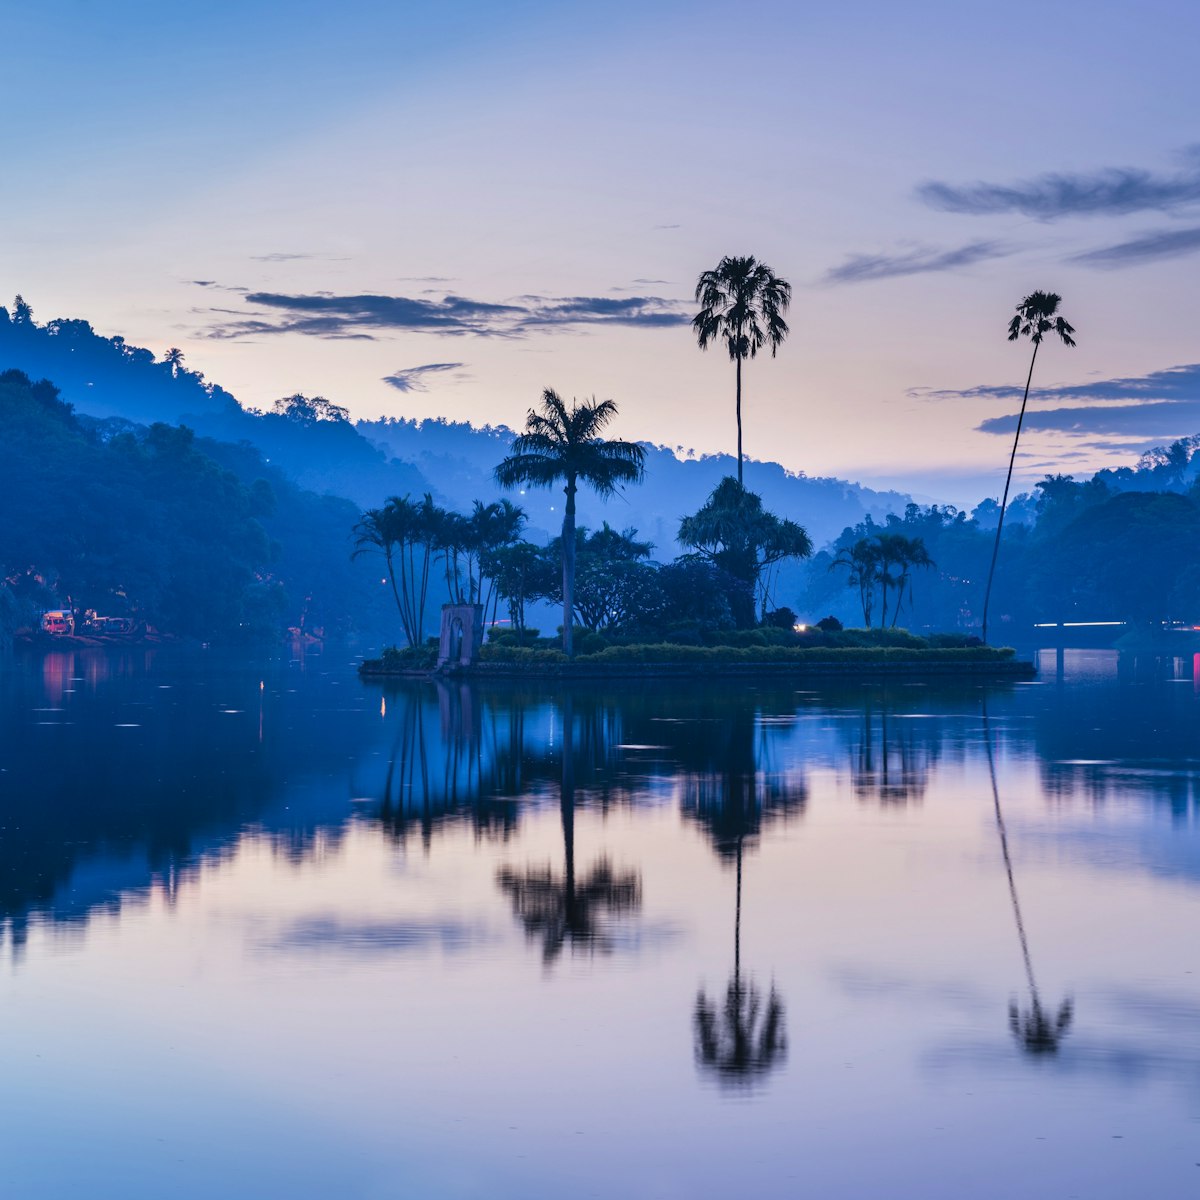 Kandy Lake and the island which houses the Royal Summer House at dawn, Kandy, Central Province, Sri Lanka, Asia